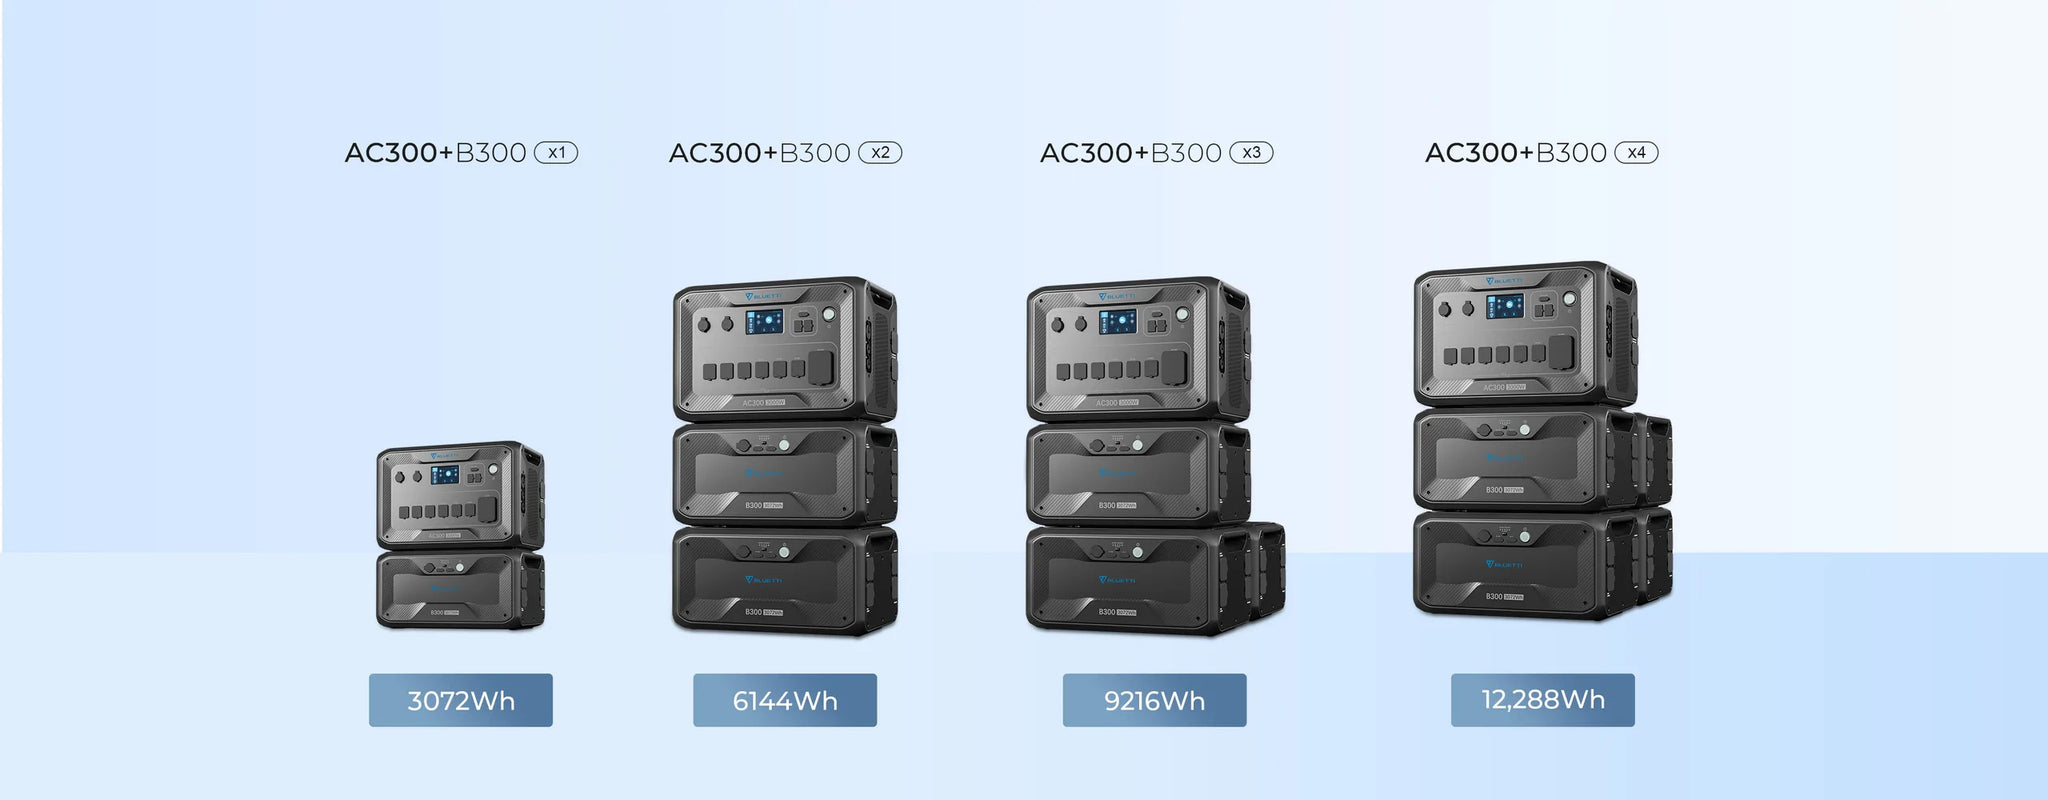 Bluetti AC300 Products and Charging Options